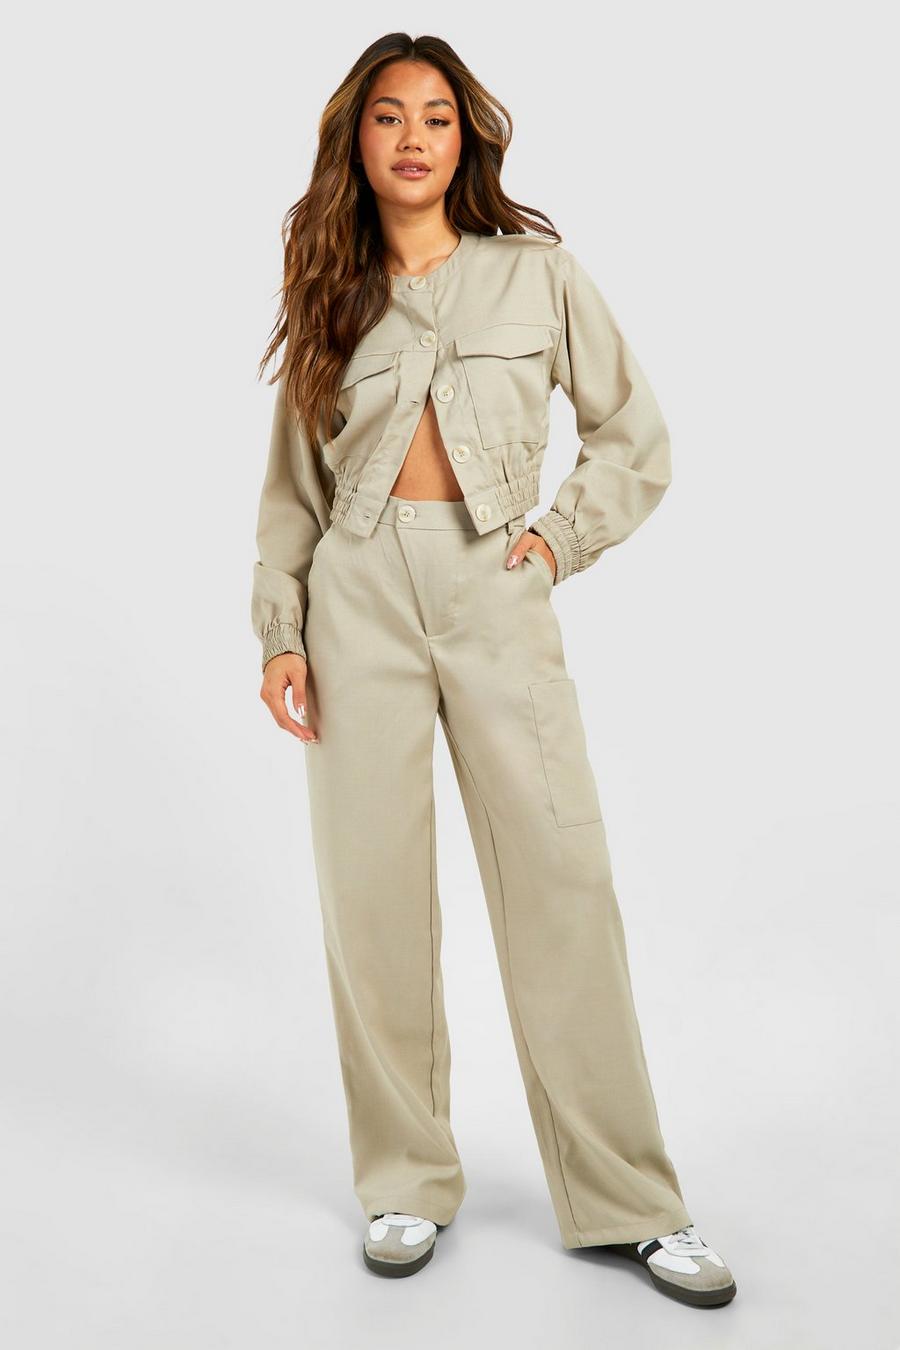 Taupe Linen Look Asymmetric Front Relaxed Fit Pants